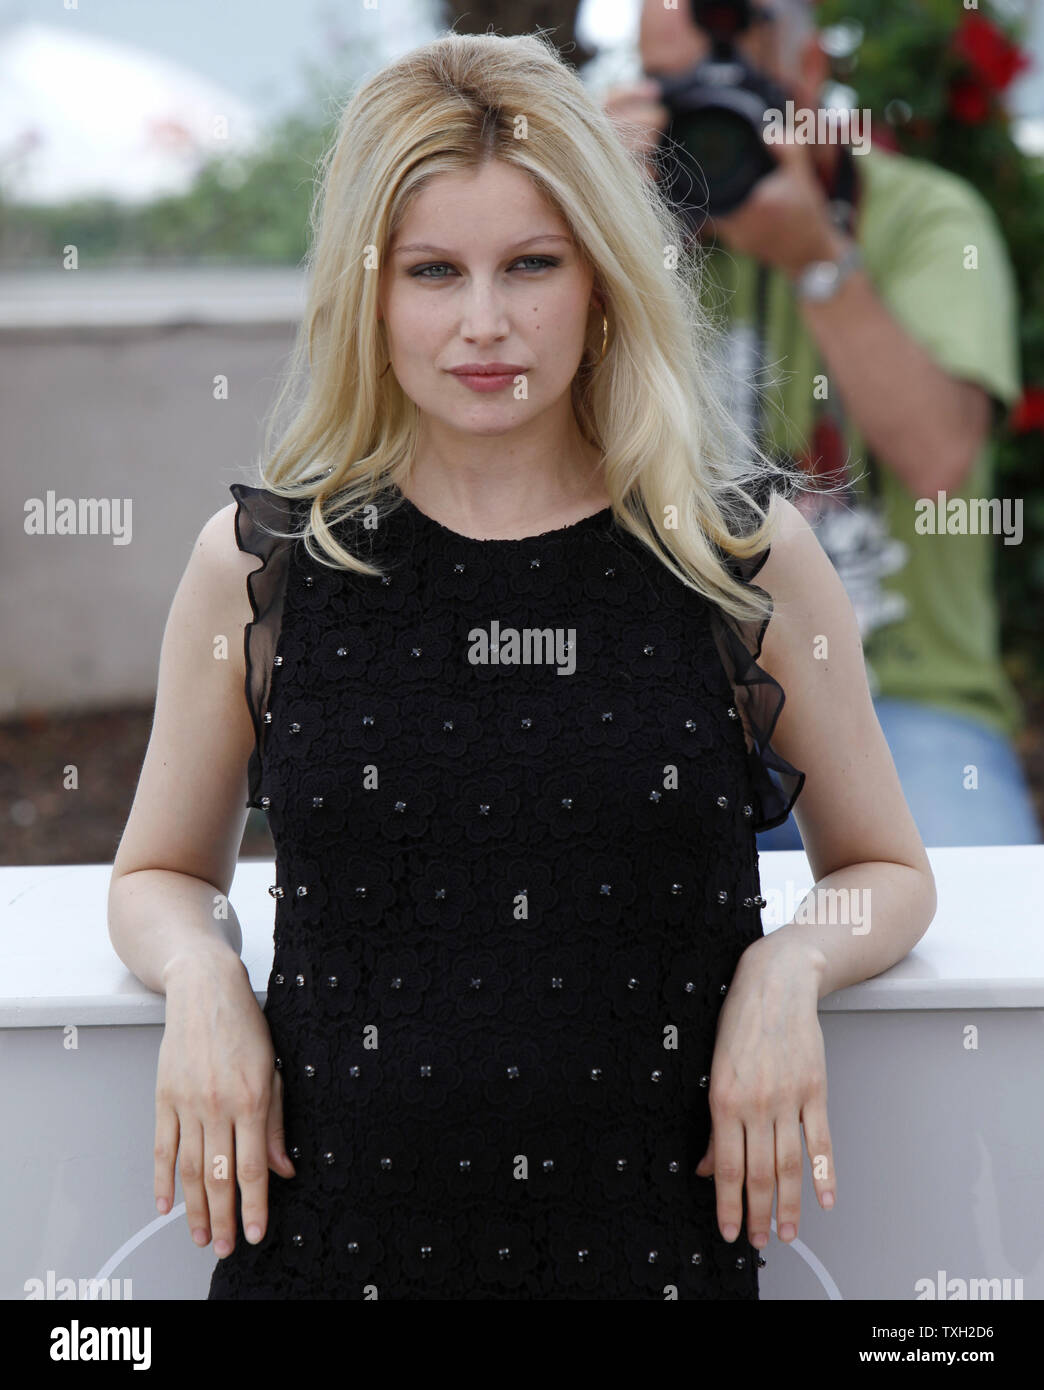 Actress Laetitia Casta arrives at a photocall for the film 'Visage' at the 62nd annual Cannes Film Festival in Cannes, France on May 23, 2009.   (UPI Photo/David Silpa) Stock Photo